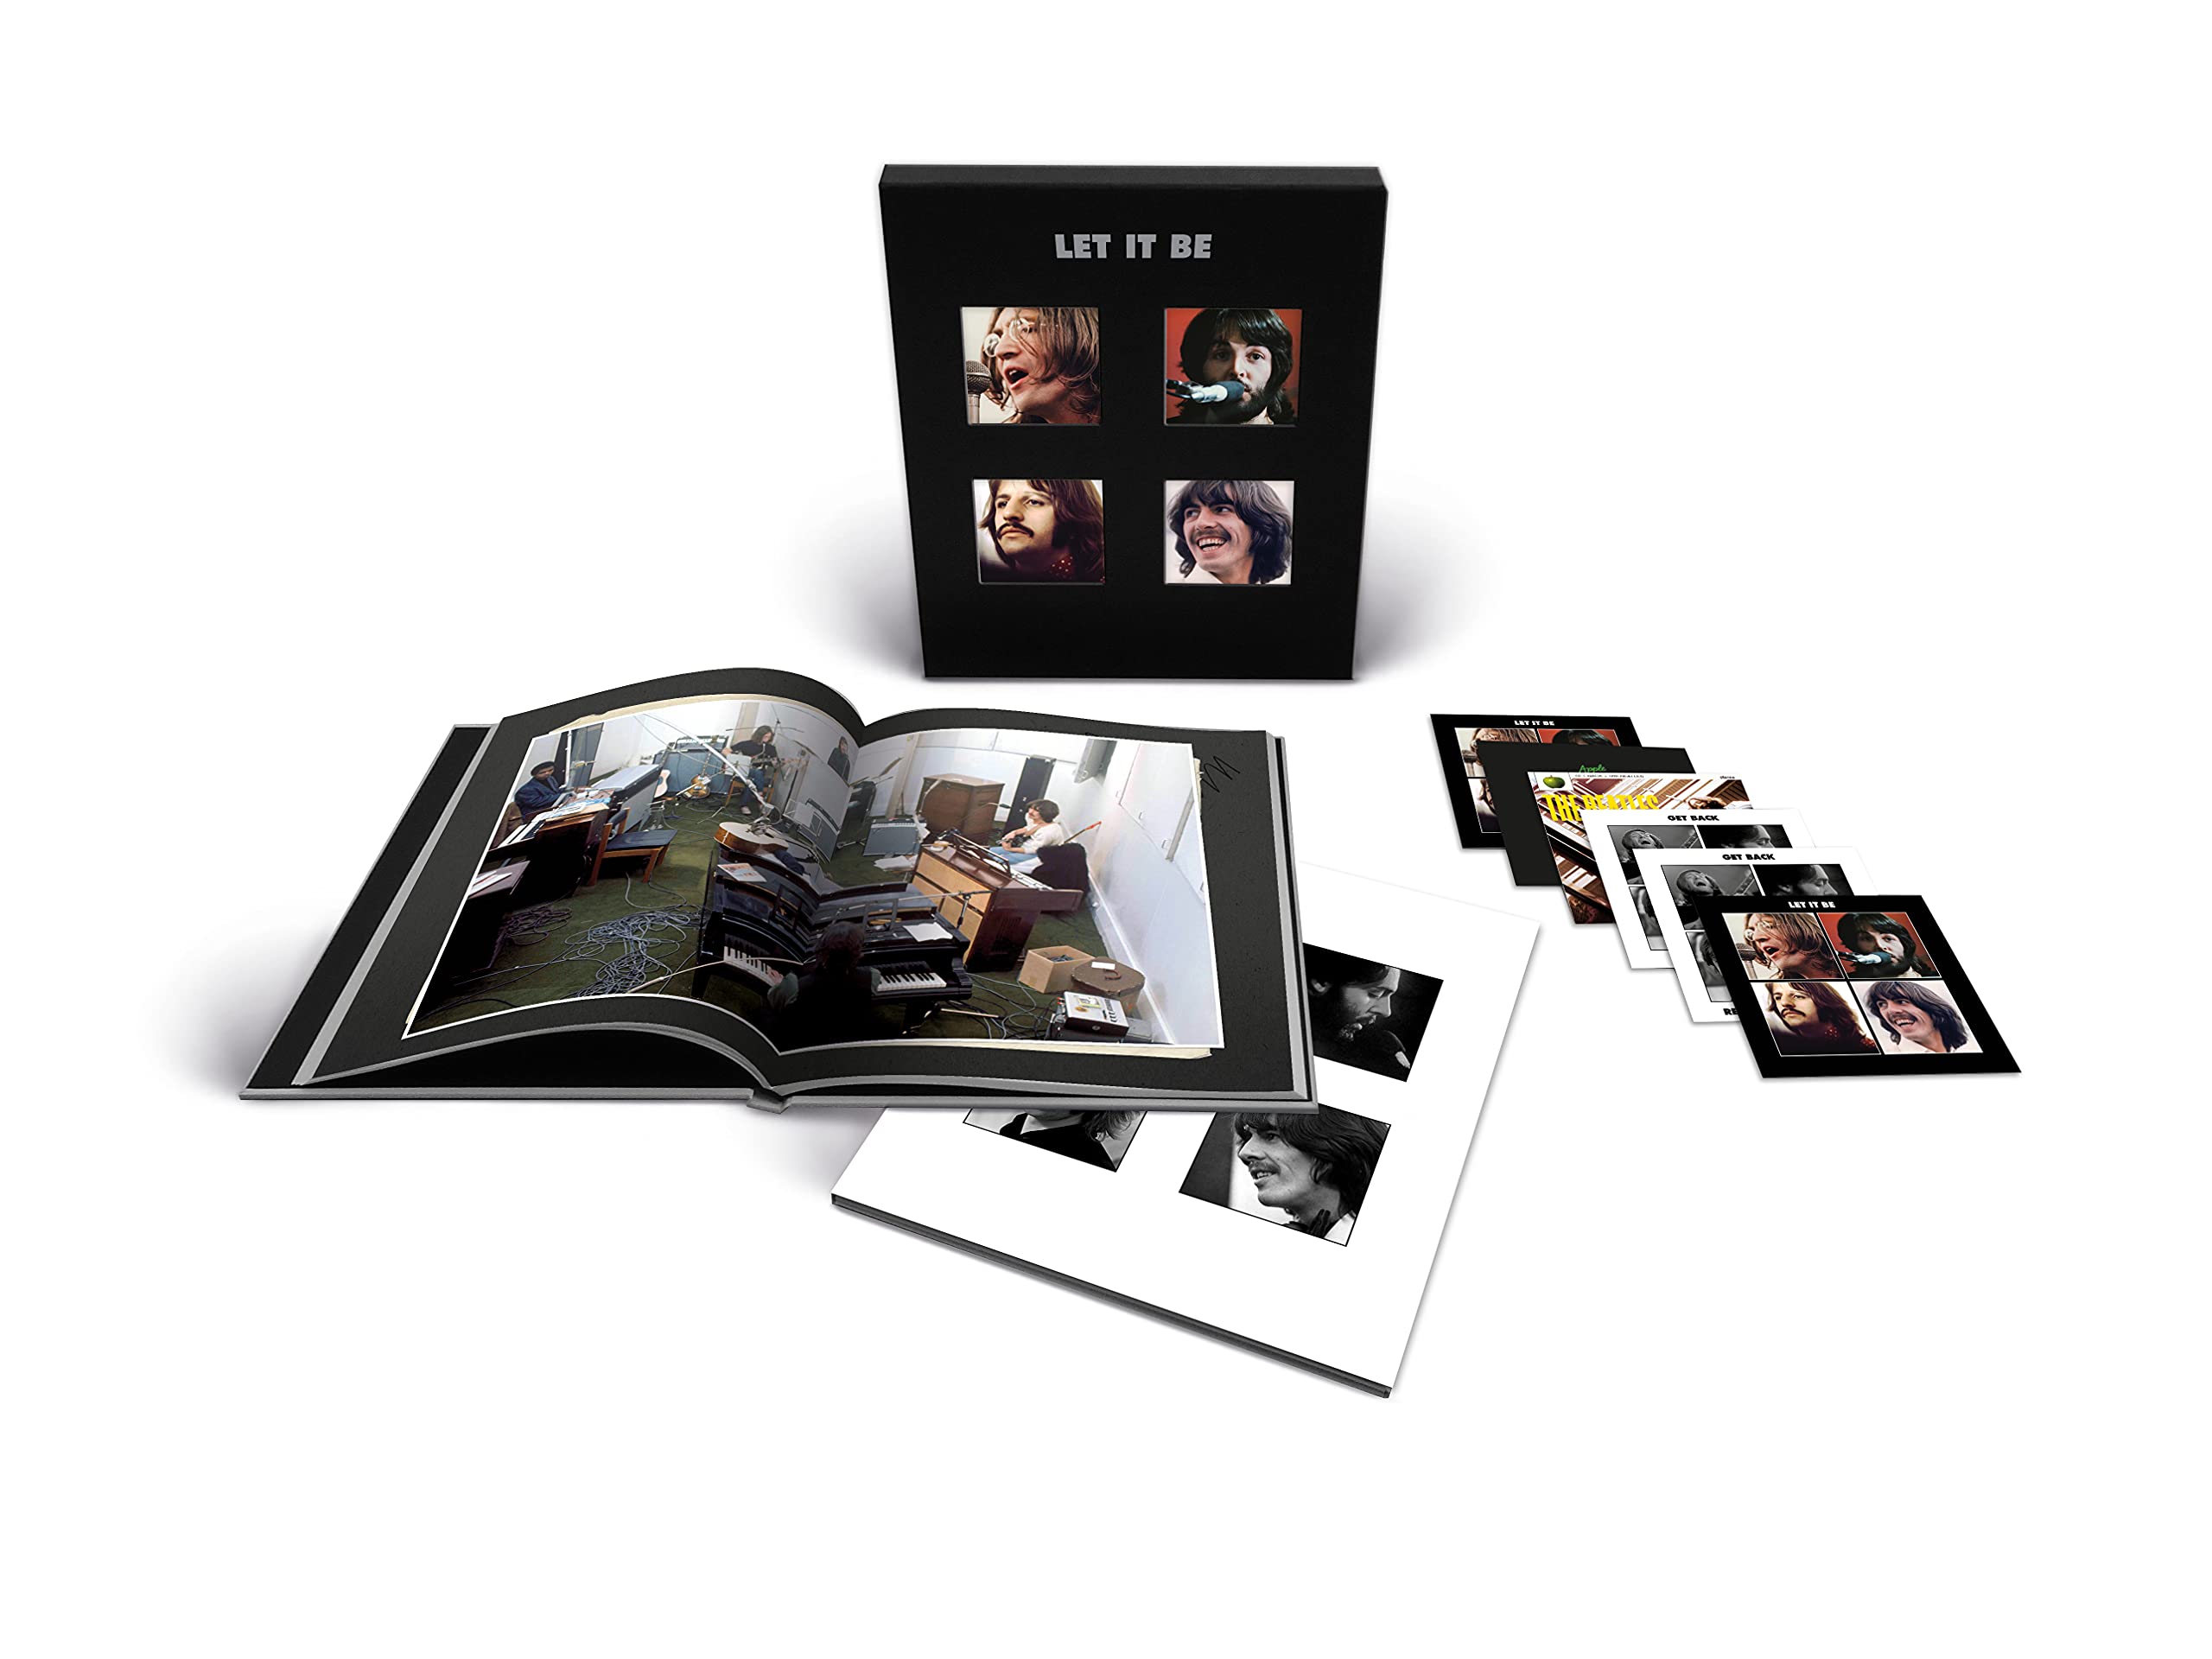 LET IT BE SPECIAL EDITION (SUPER DLX) on MovieShack